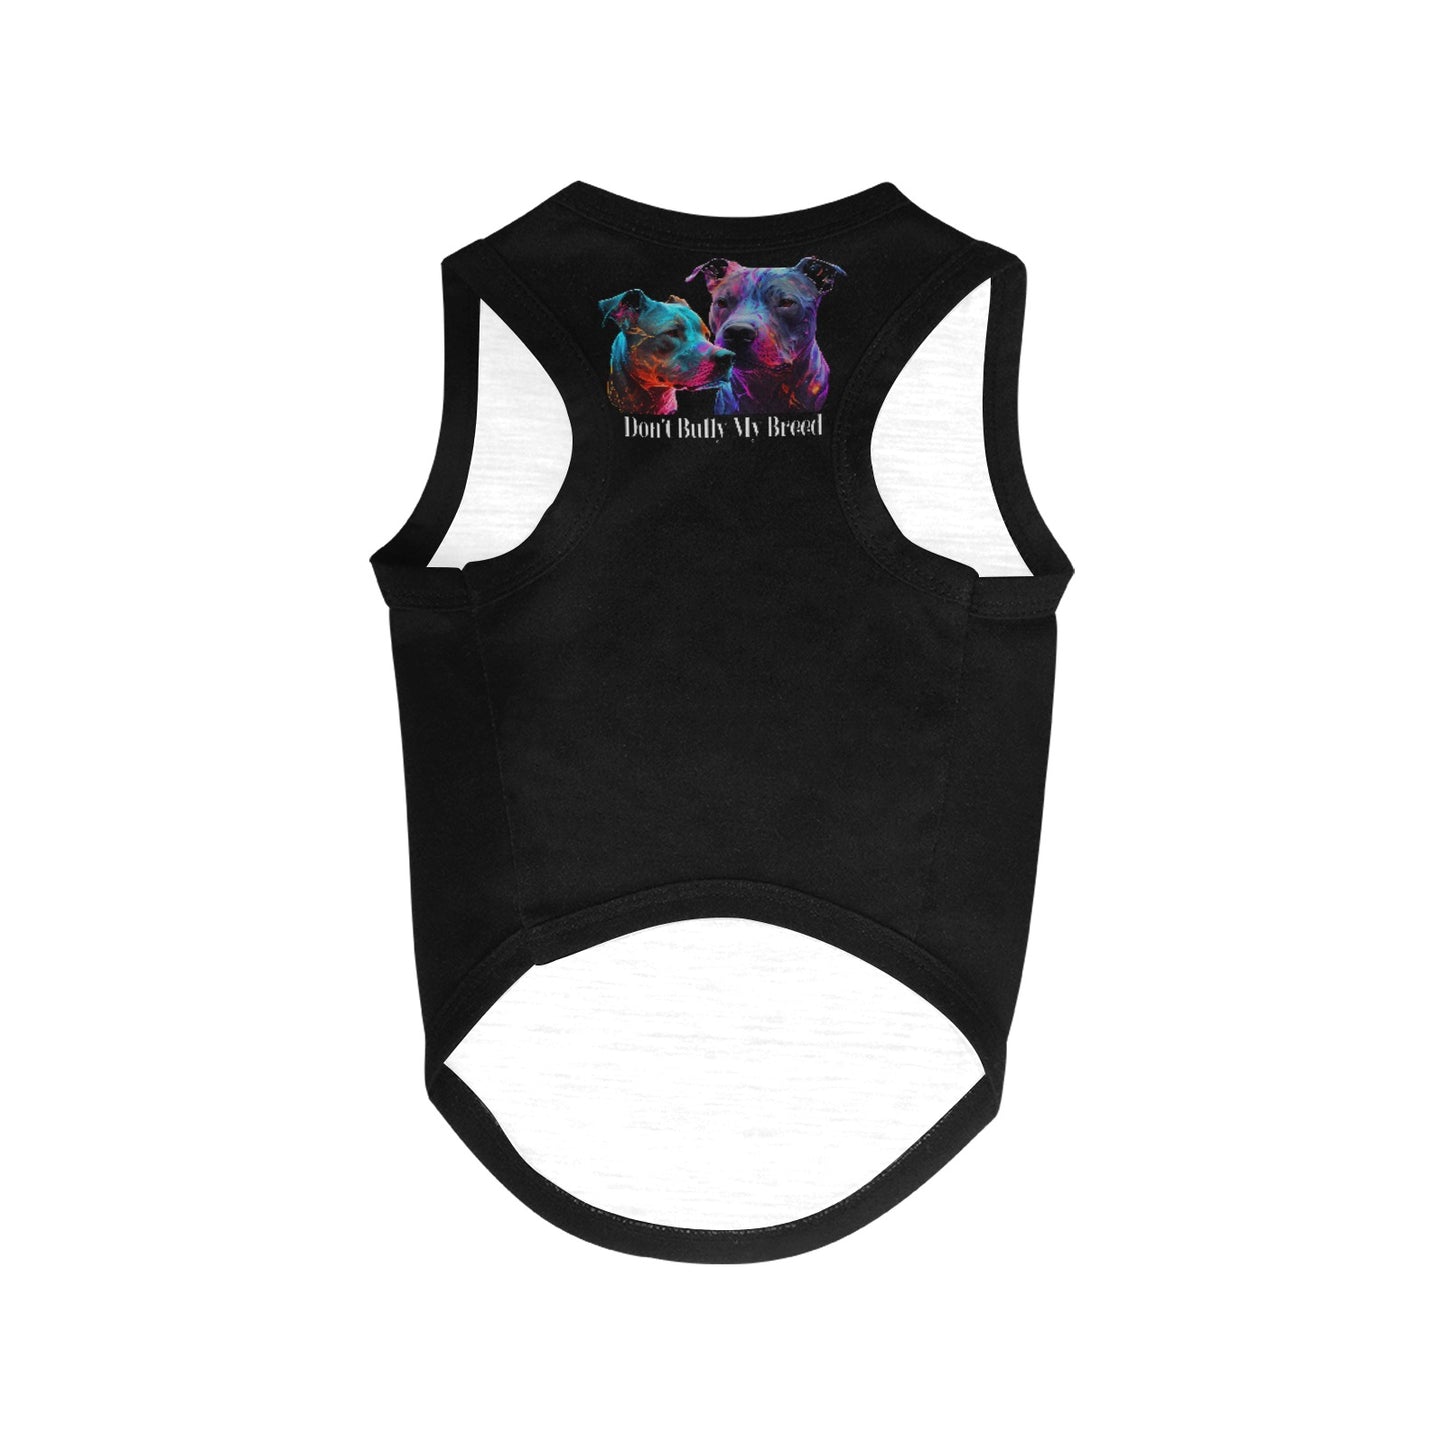 Don't Bully My Breed Neon Pet Tank Top